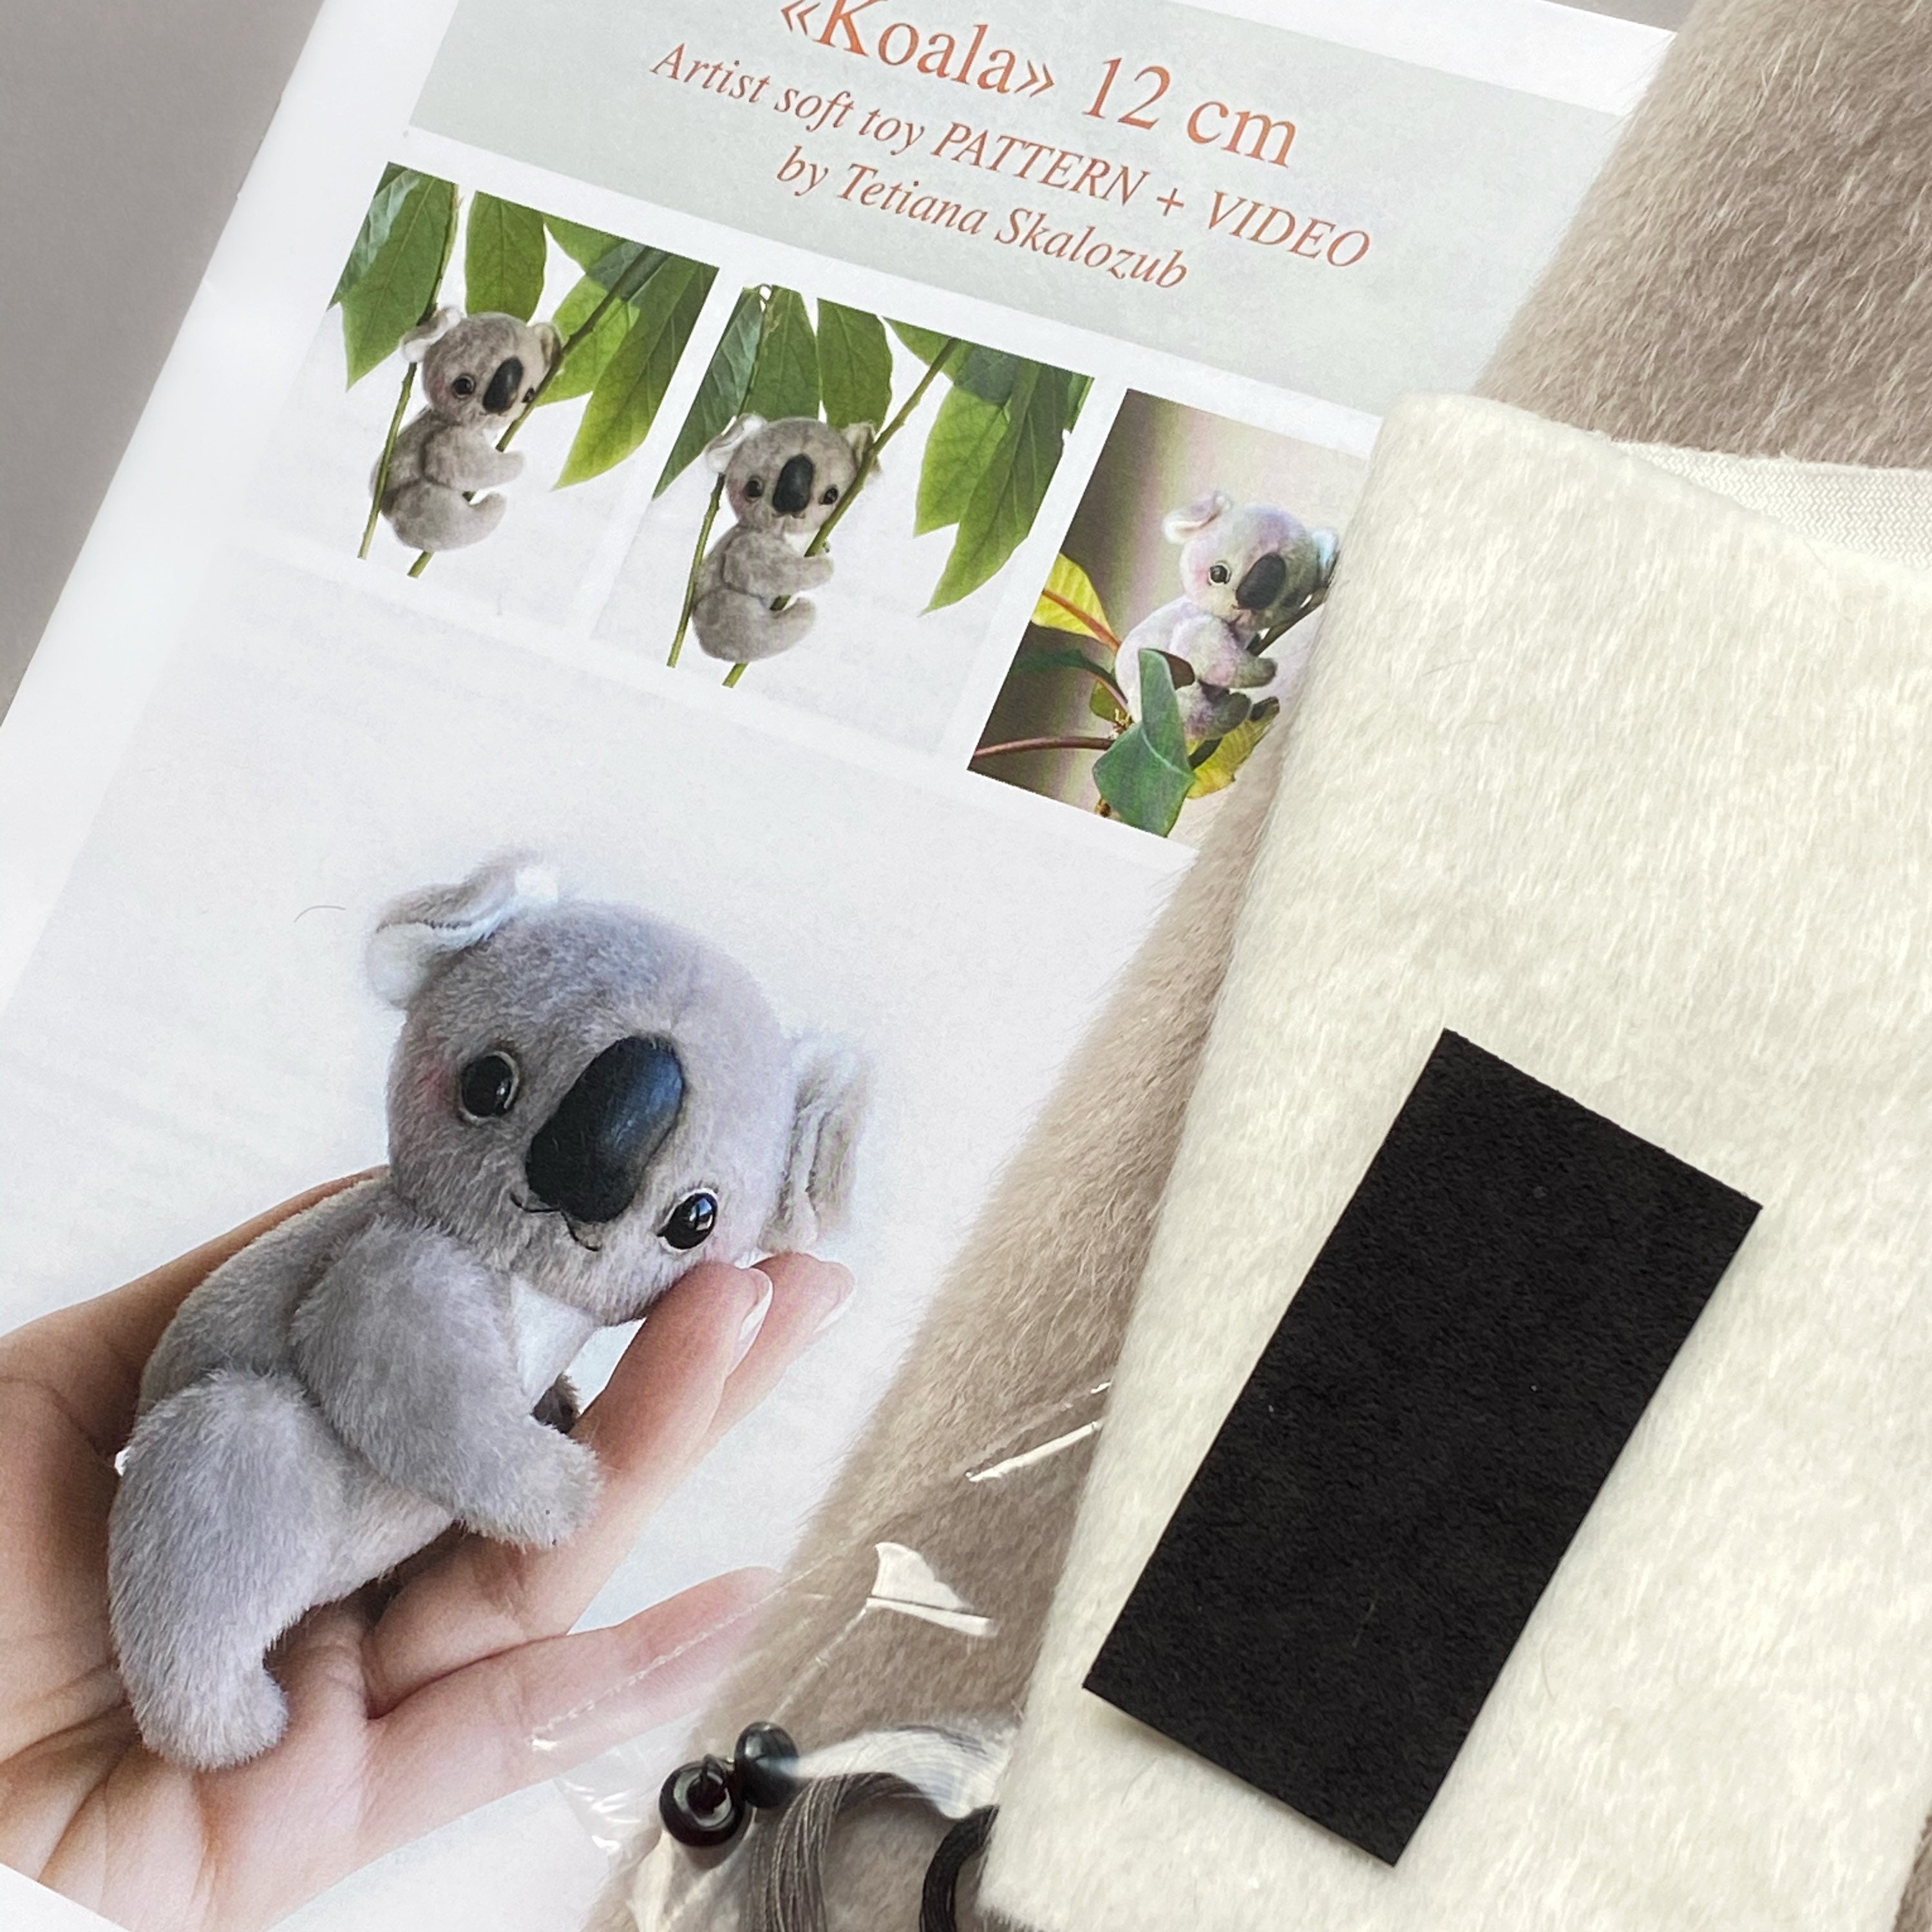  Craft-tastic – Make A Friend: Koala – Beginner Sewing Craft Kit  – Makes Stuffie Koala with Clothes and Accessories – Fun and Unique Gifts  for Kids – Ages 4+ with Help